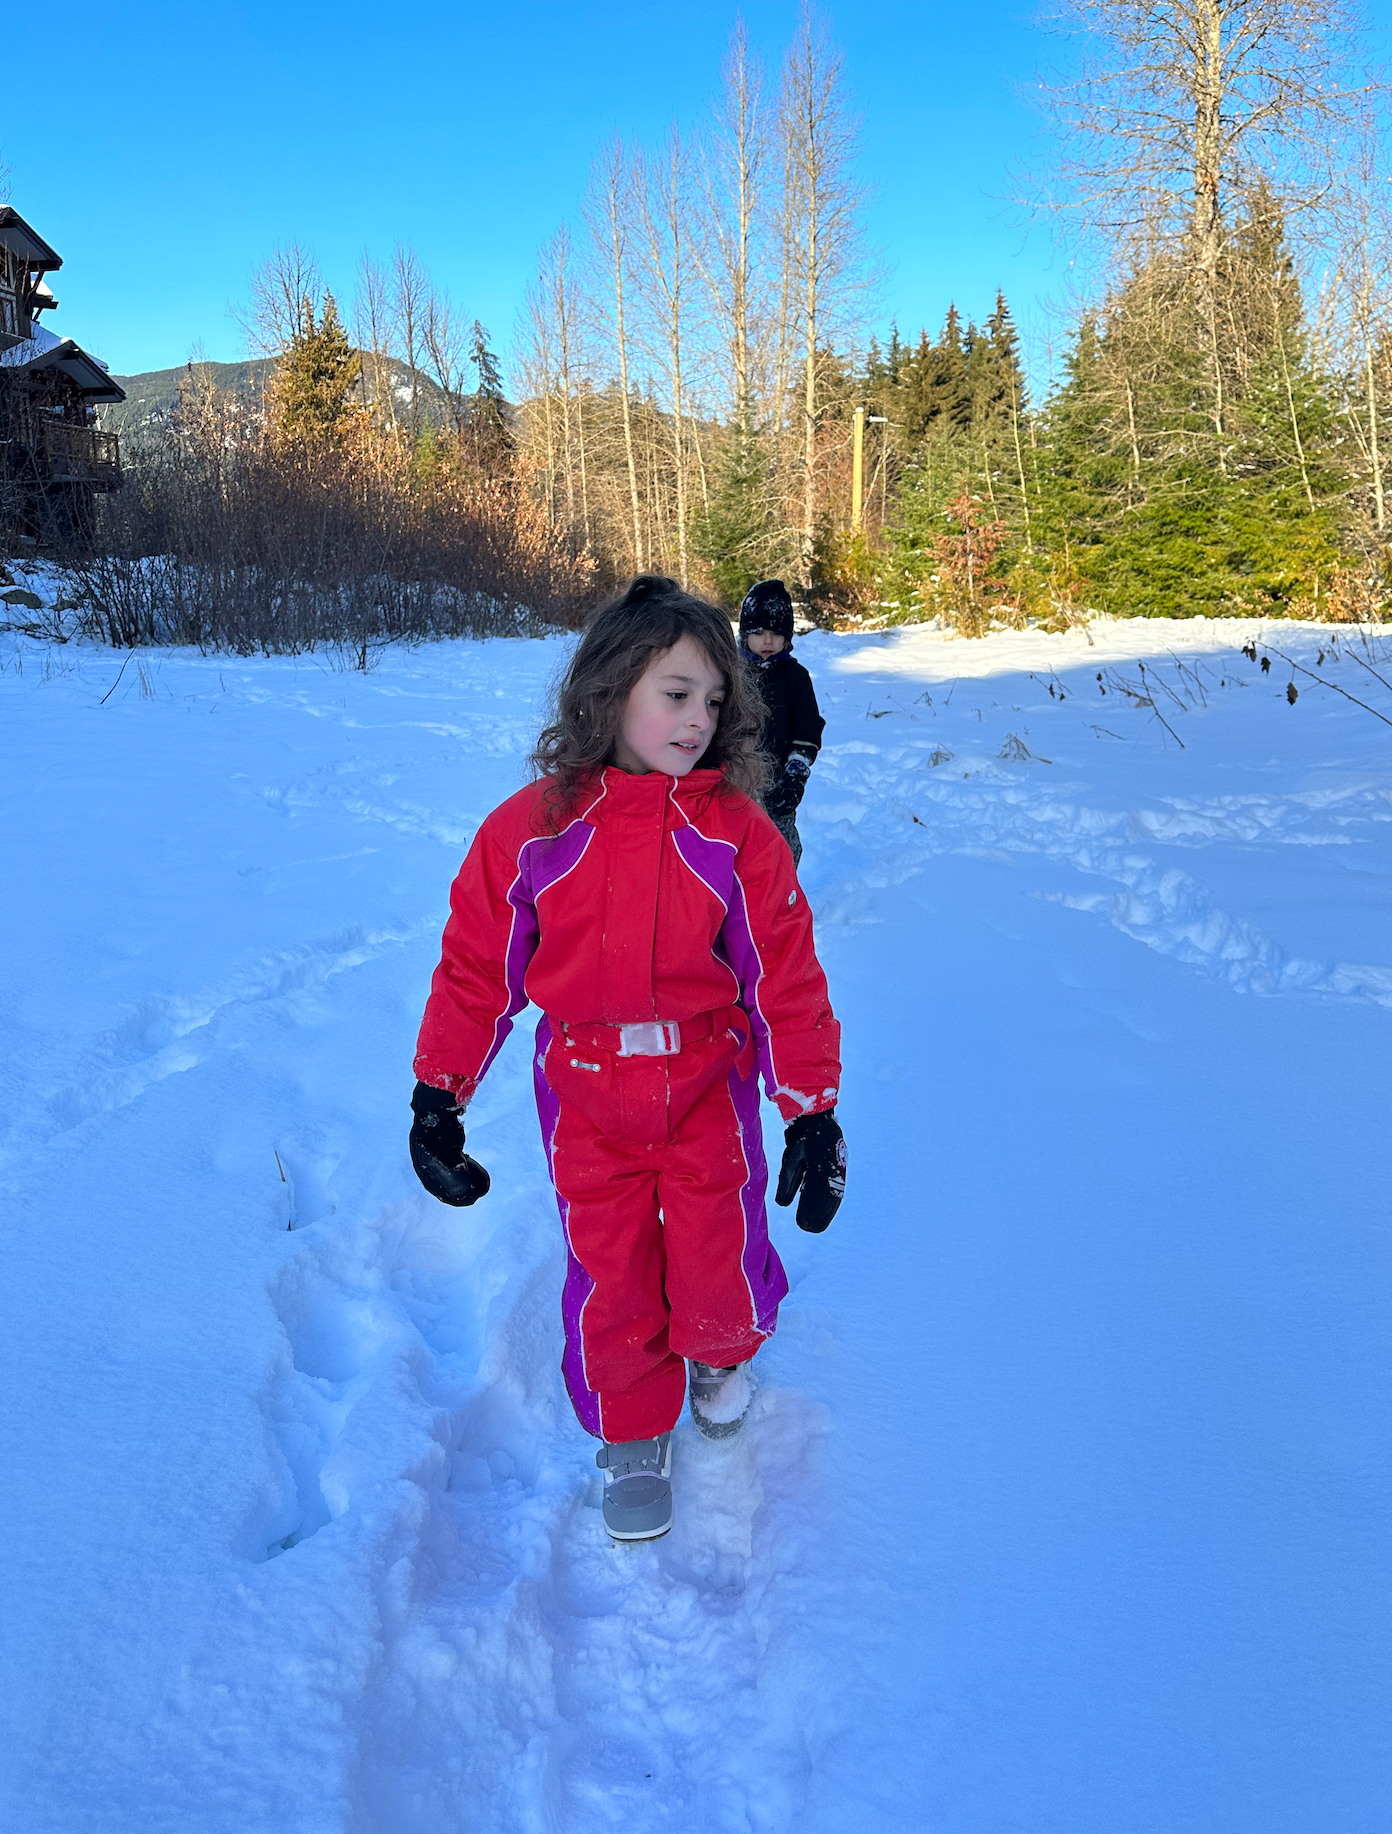 [6/7y] SPYDER Retro Snowsuit w/Belt *SMALL TO TALL feature! extend it